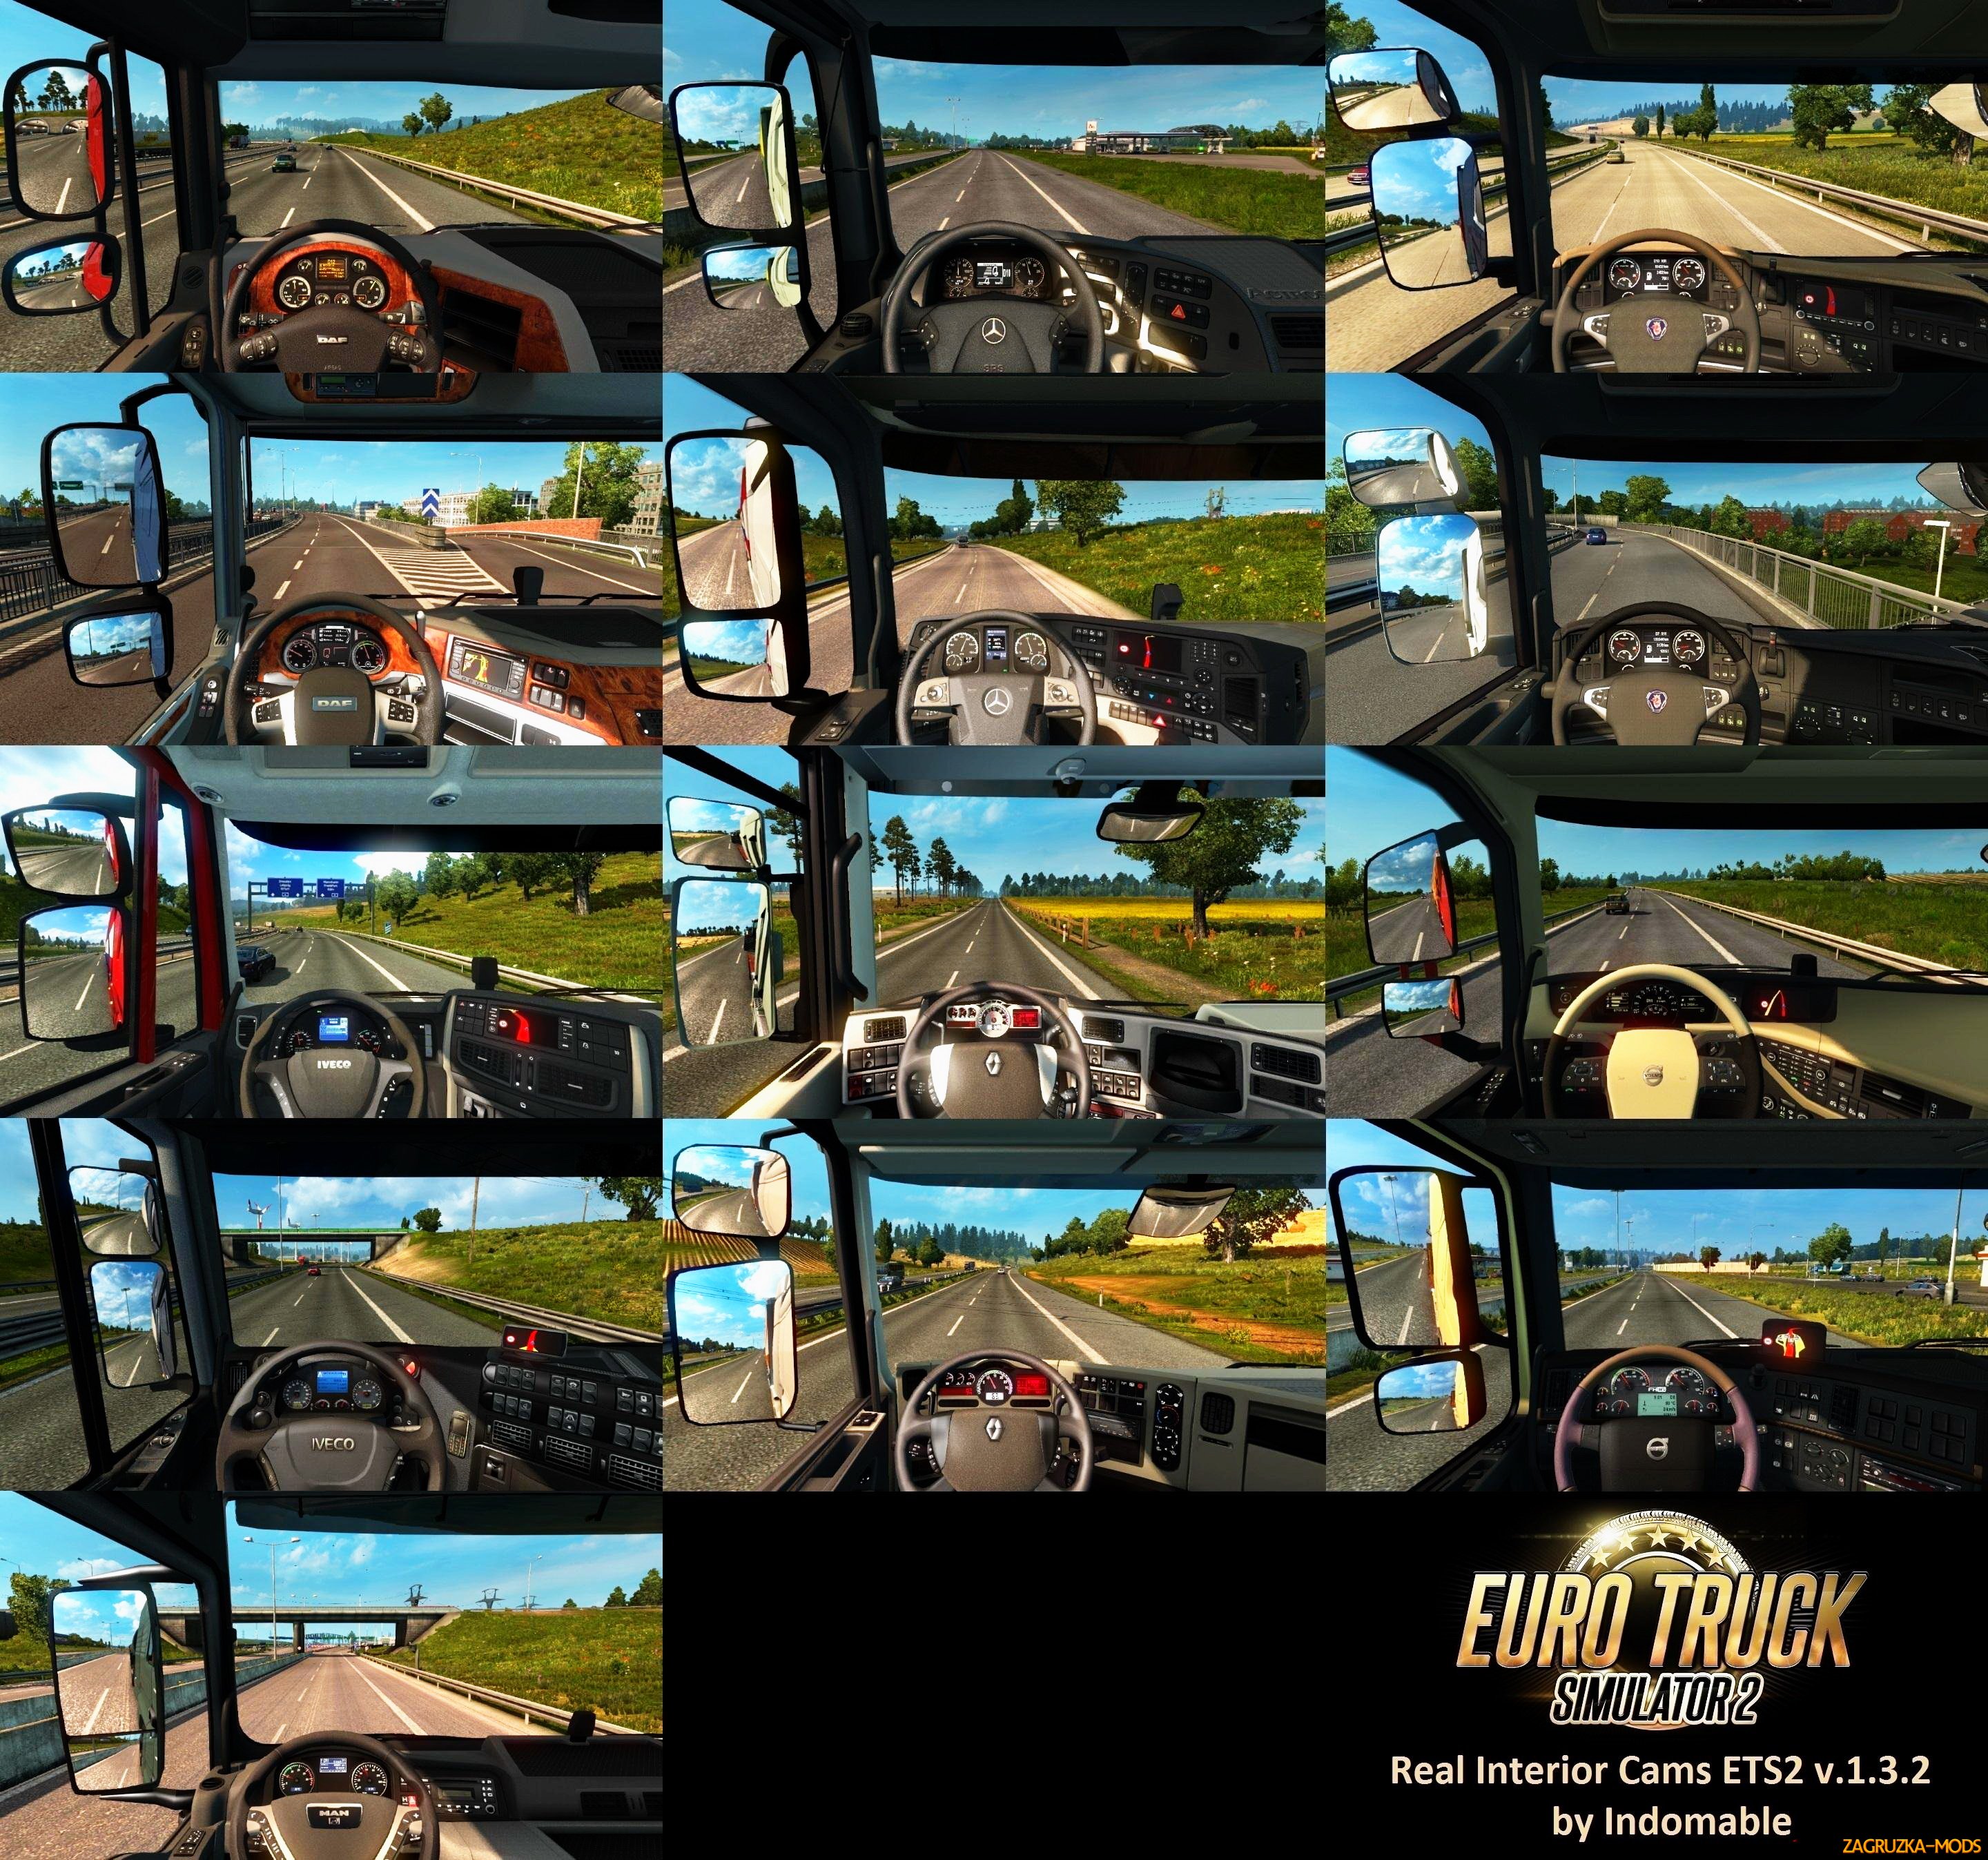 Real interior cams for all trucks v1.3.2 for ETS 2